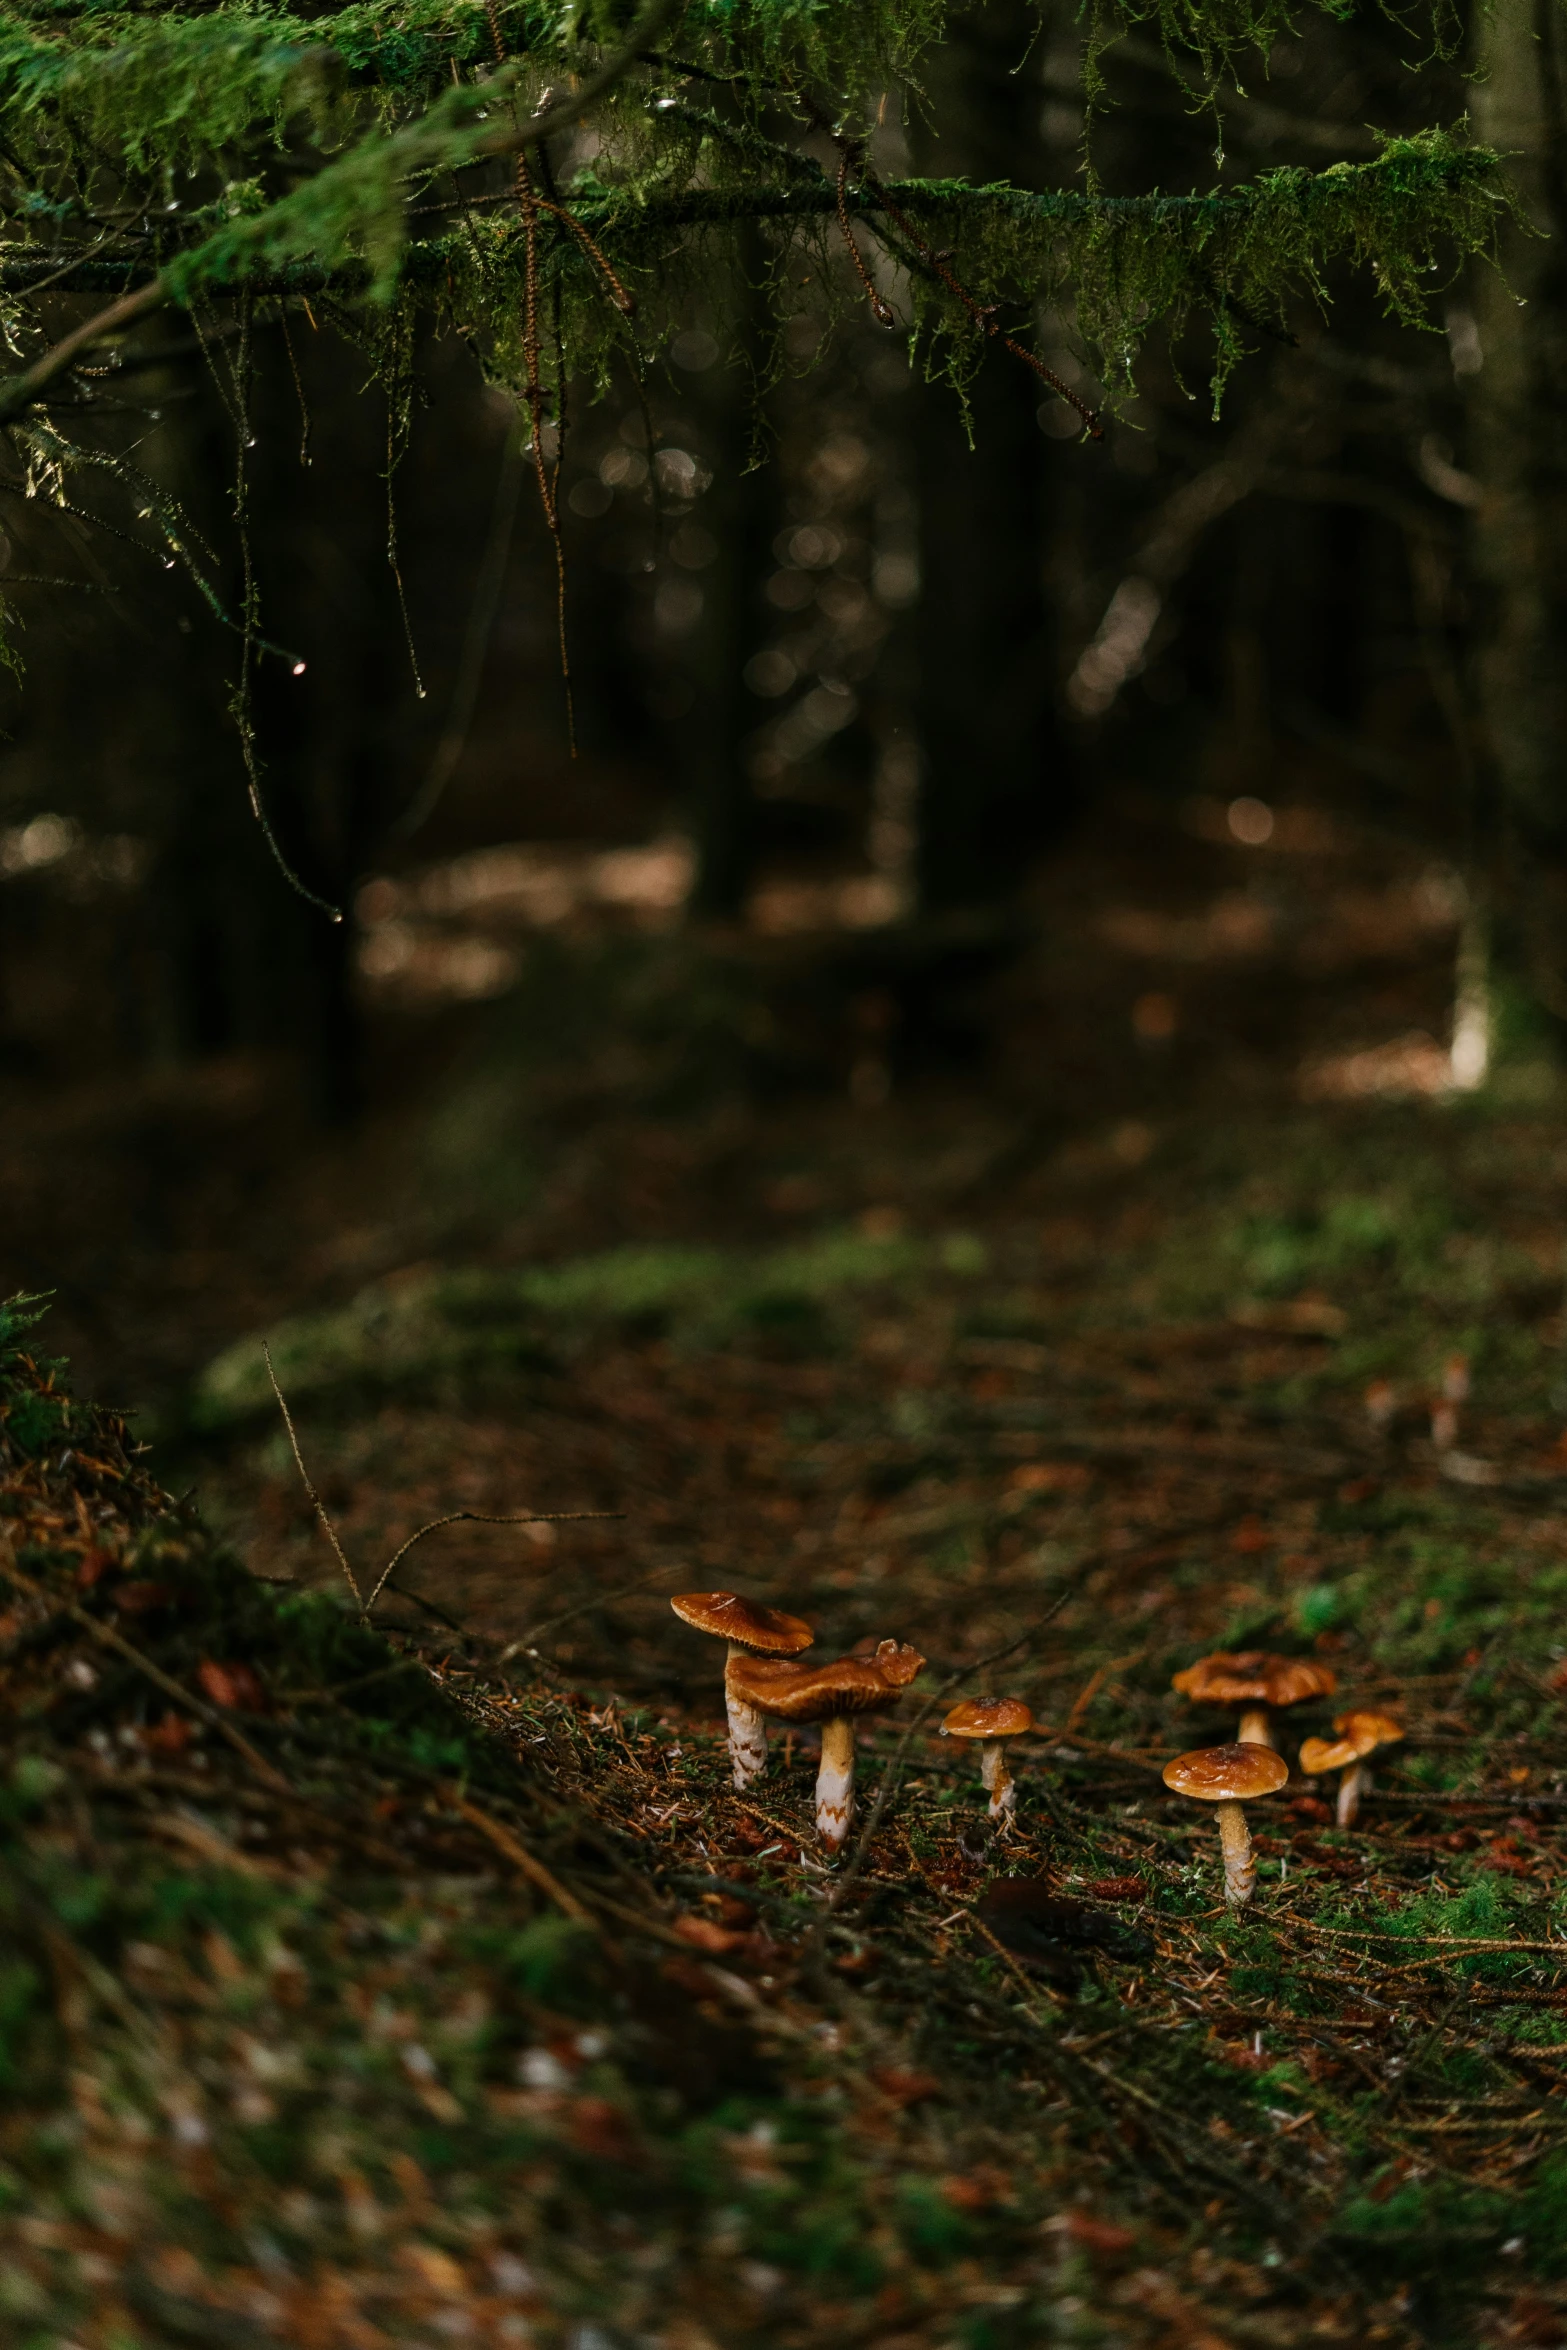 two mushrooms stand alone in the woods